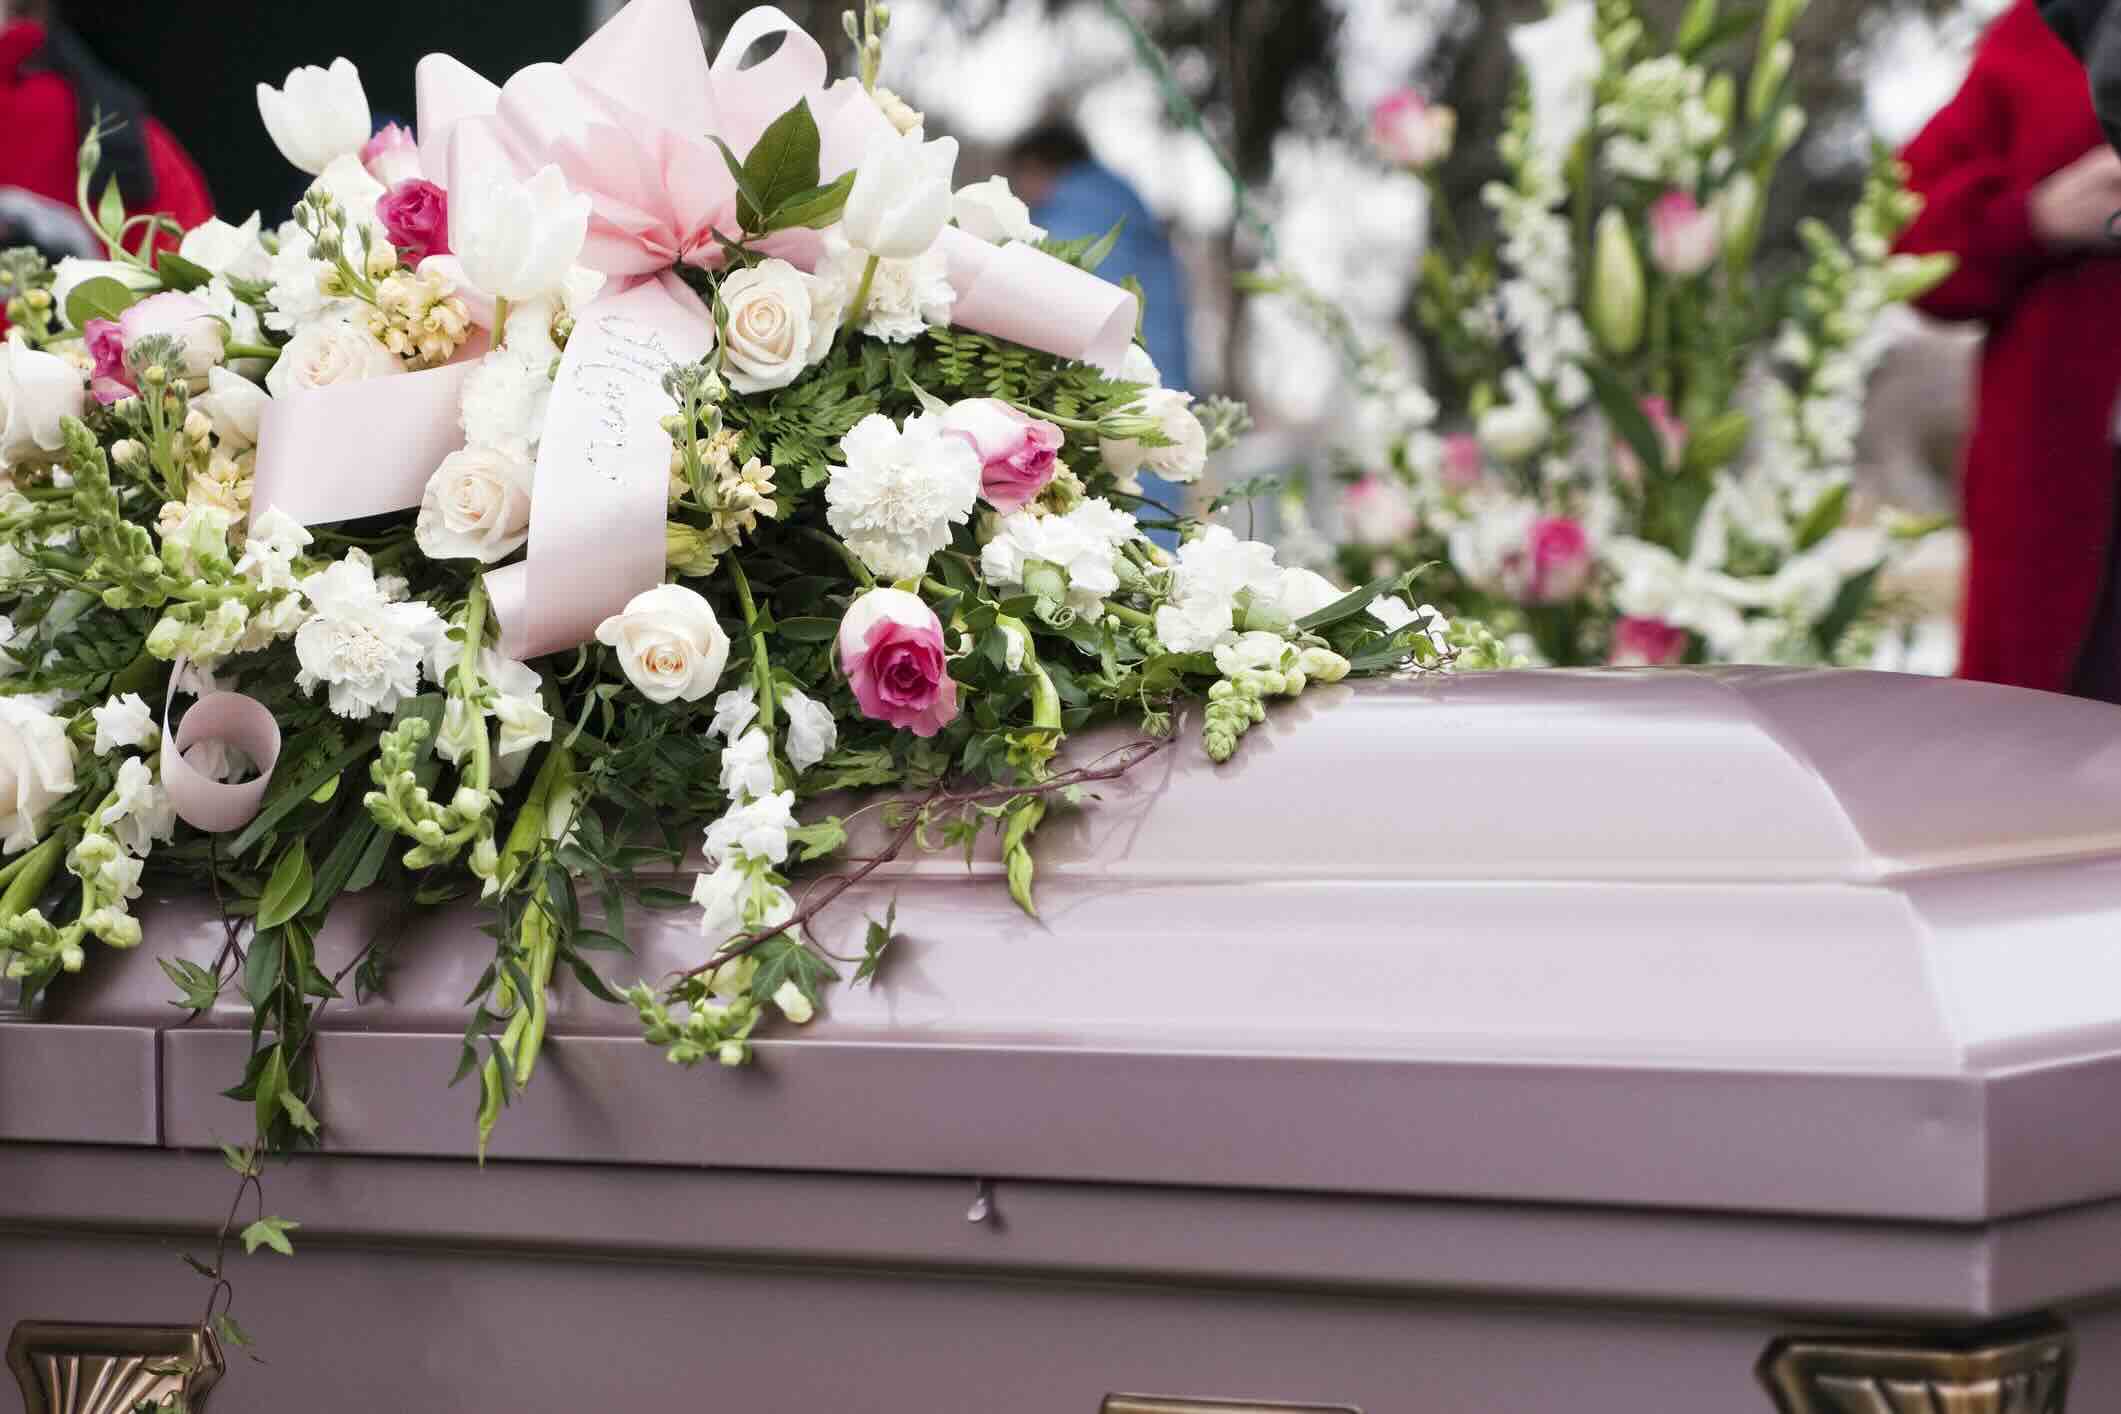 How To Send Floral Arrangements For A Wake